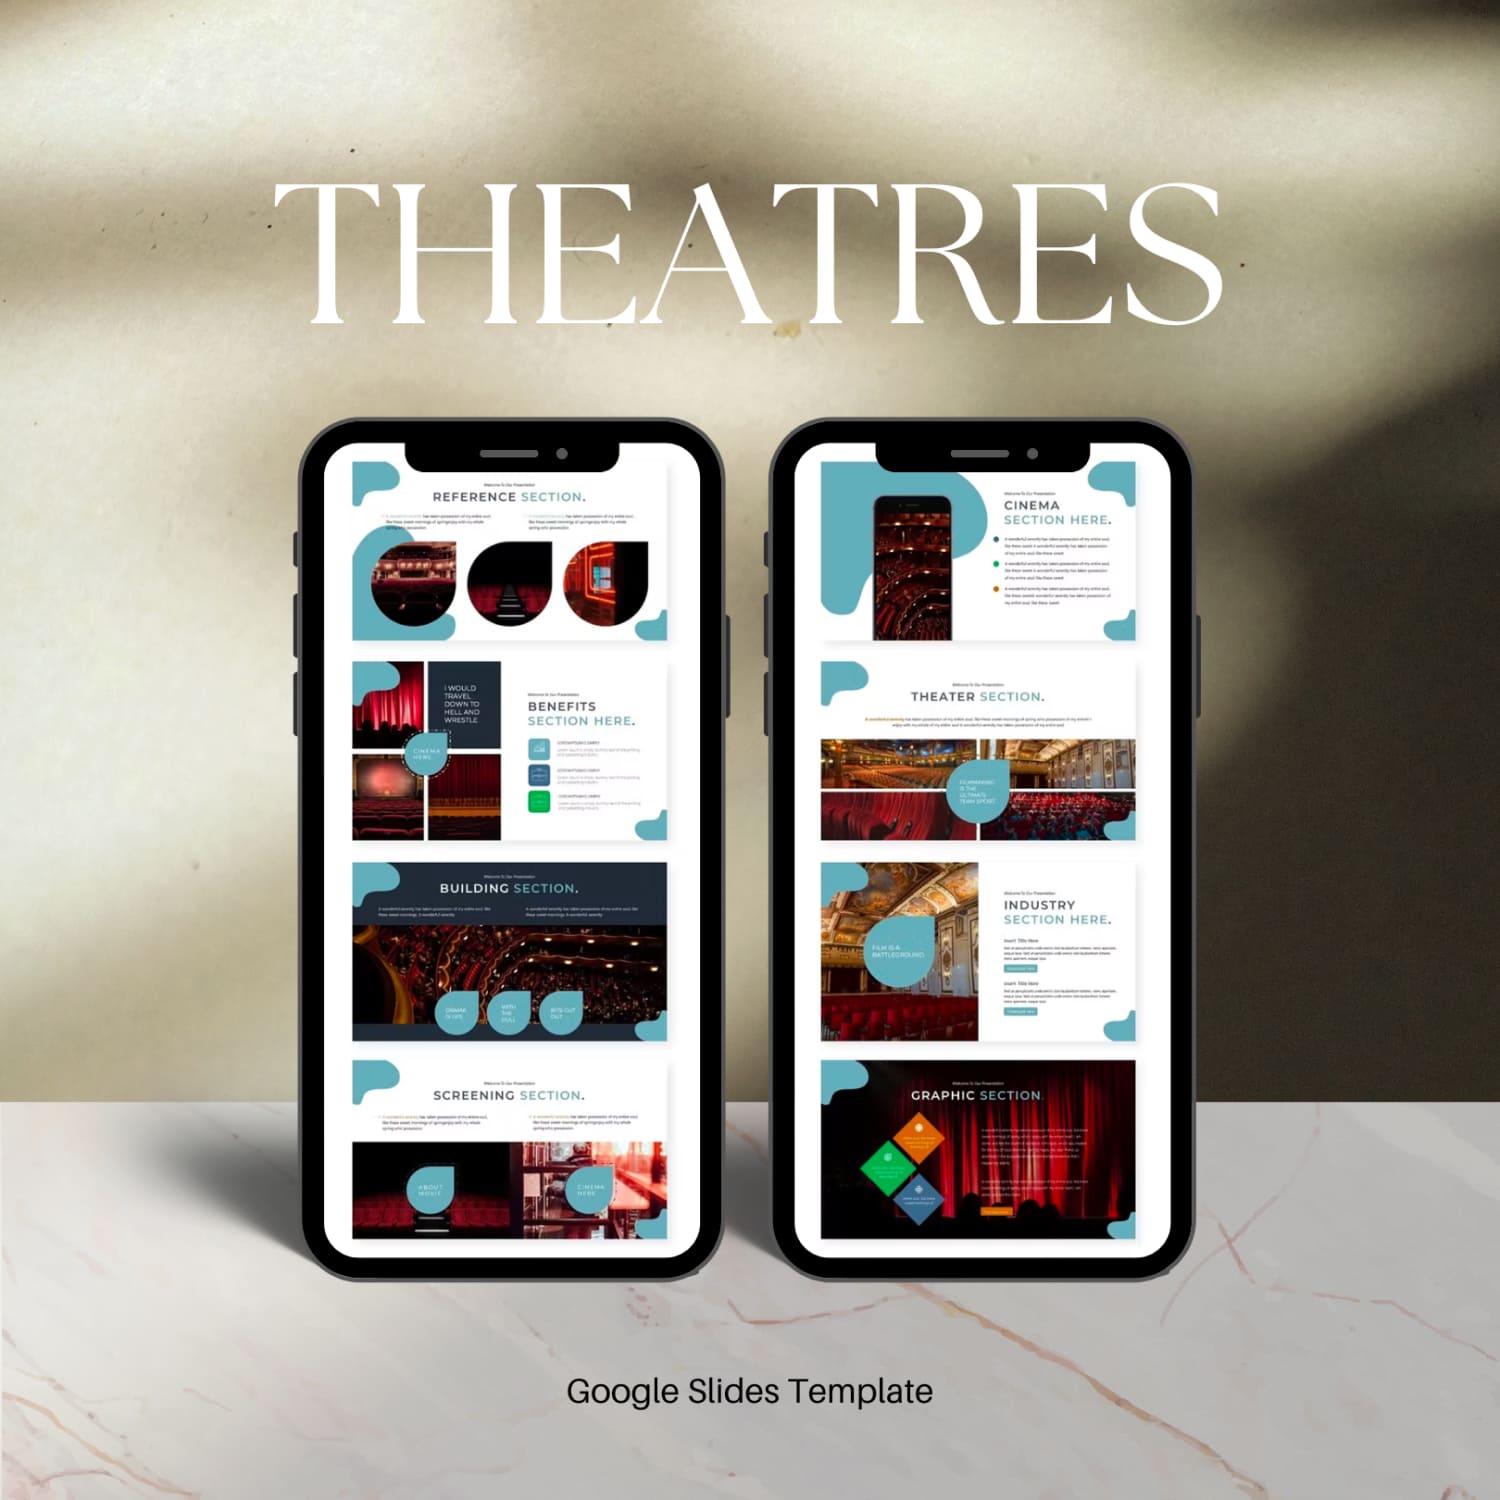 Theaters | Google Slides Template.